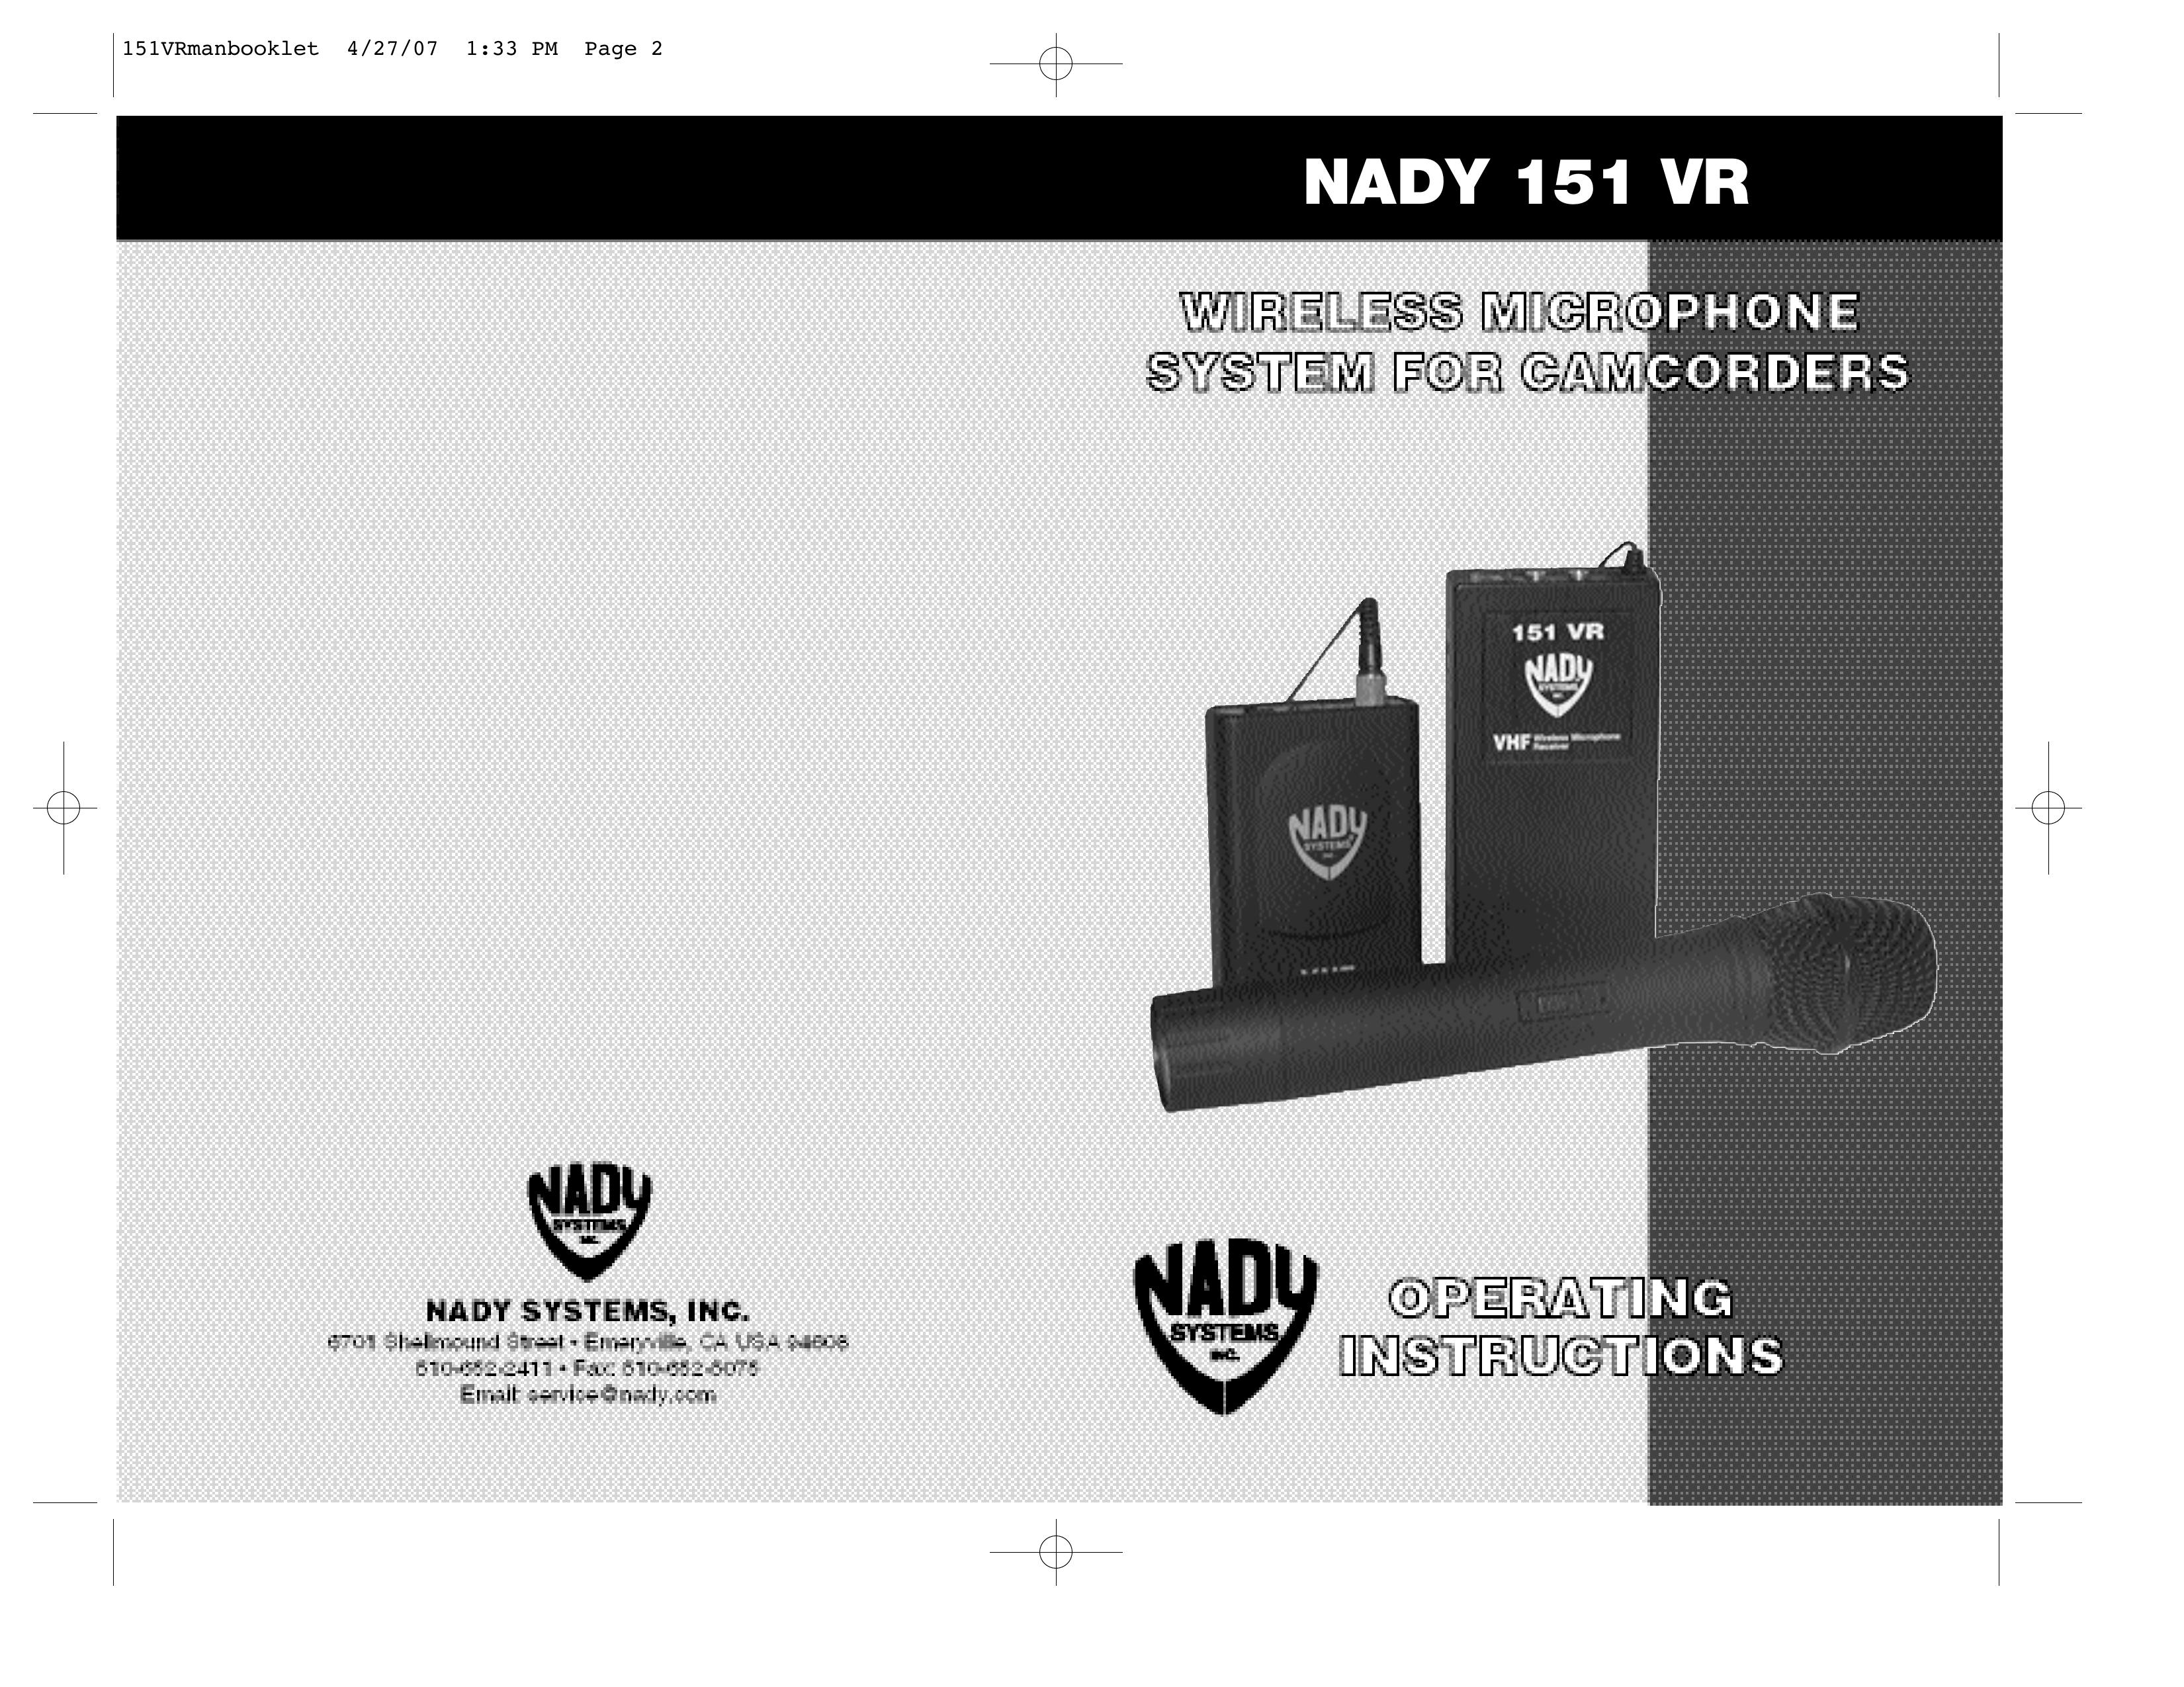 Nady Systems 151VRLTSYSTEMH Microphone User Manual